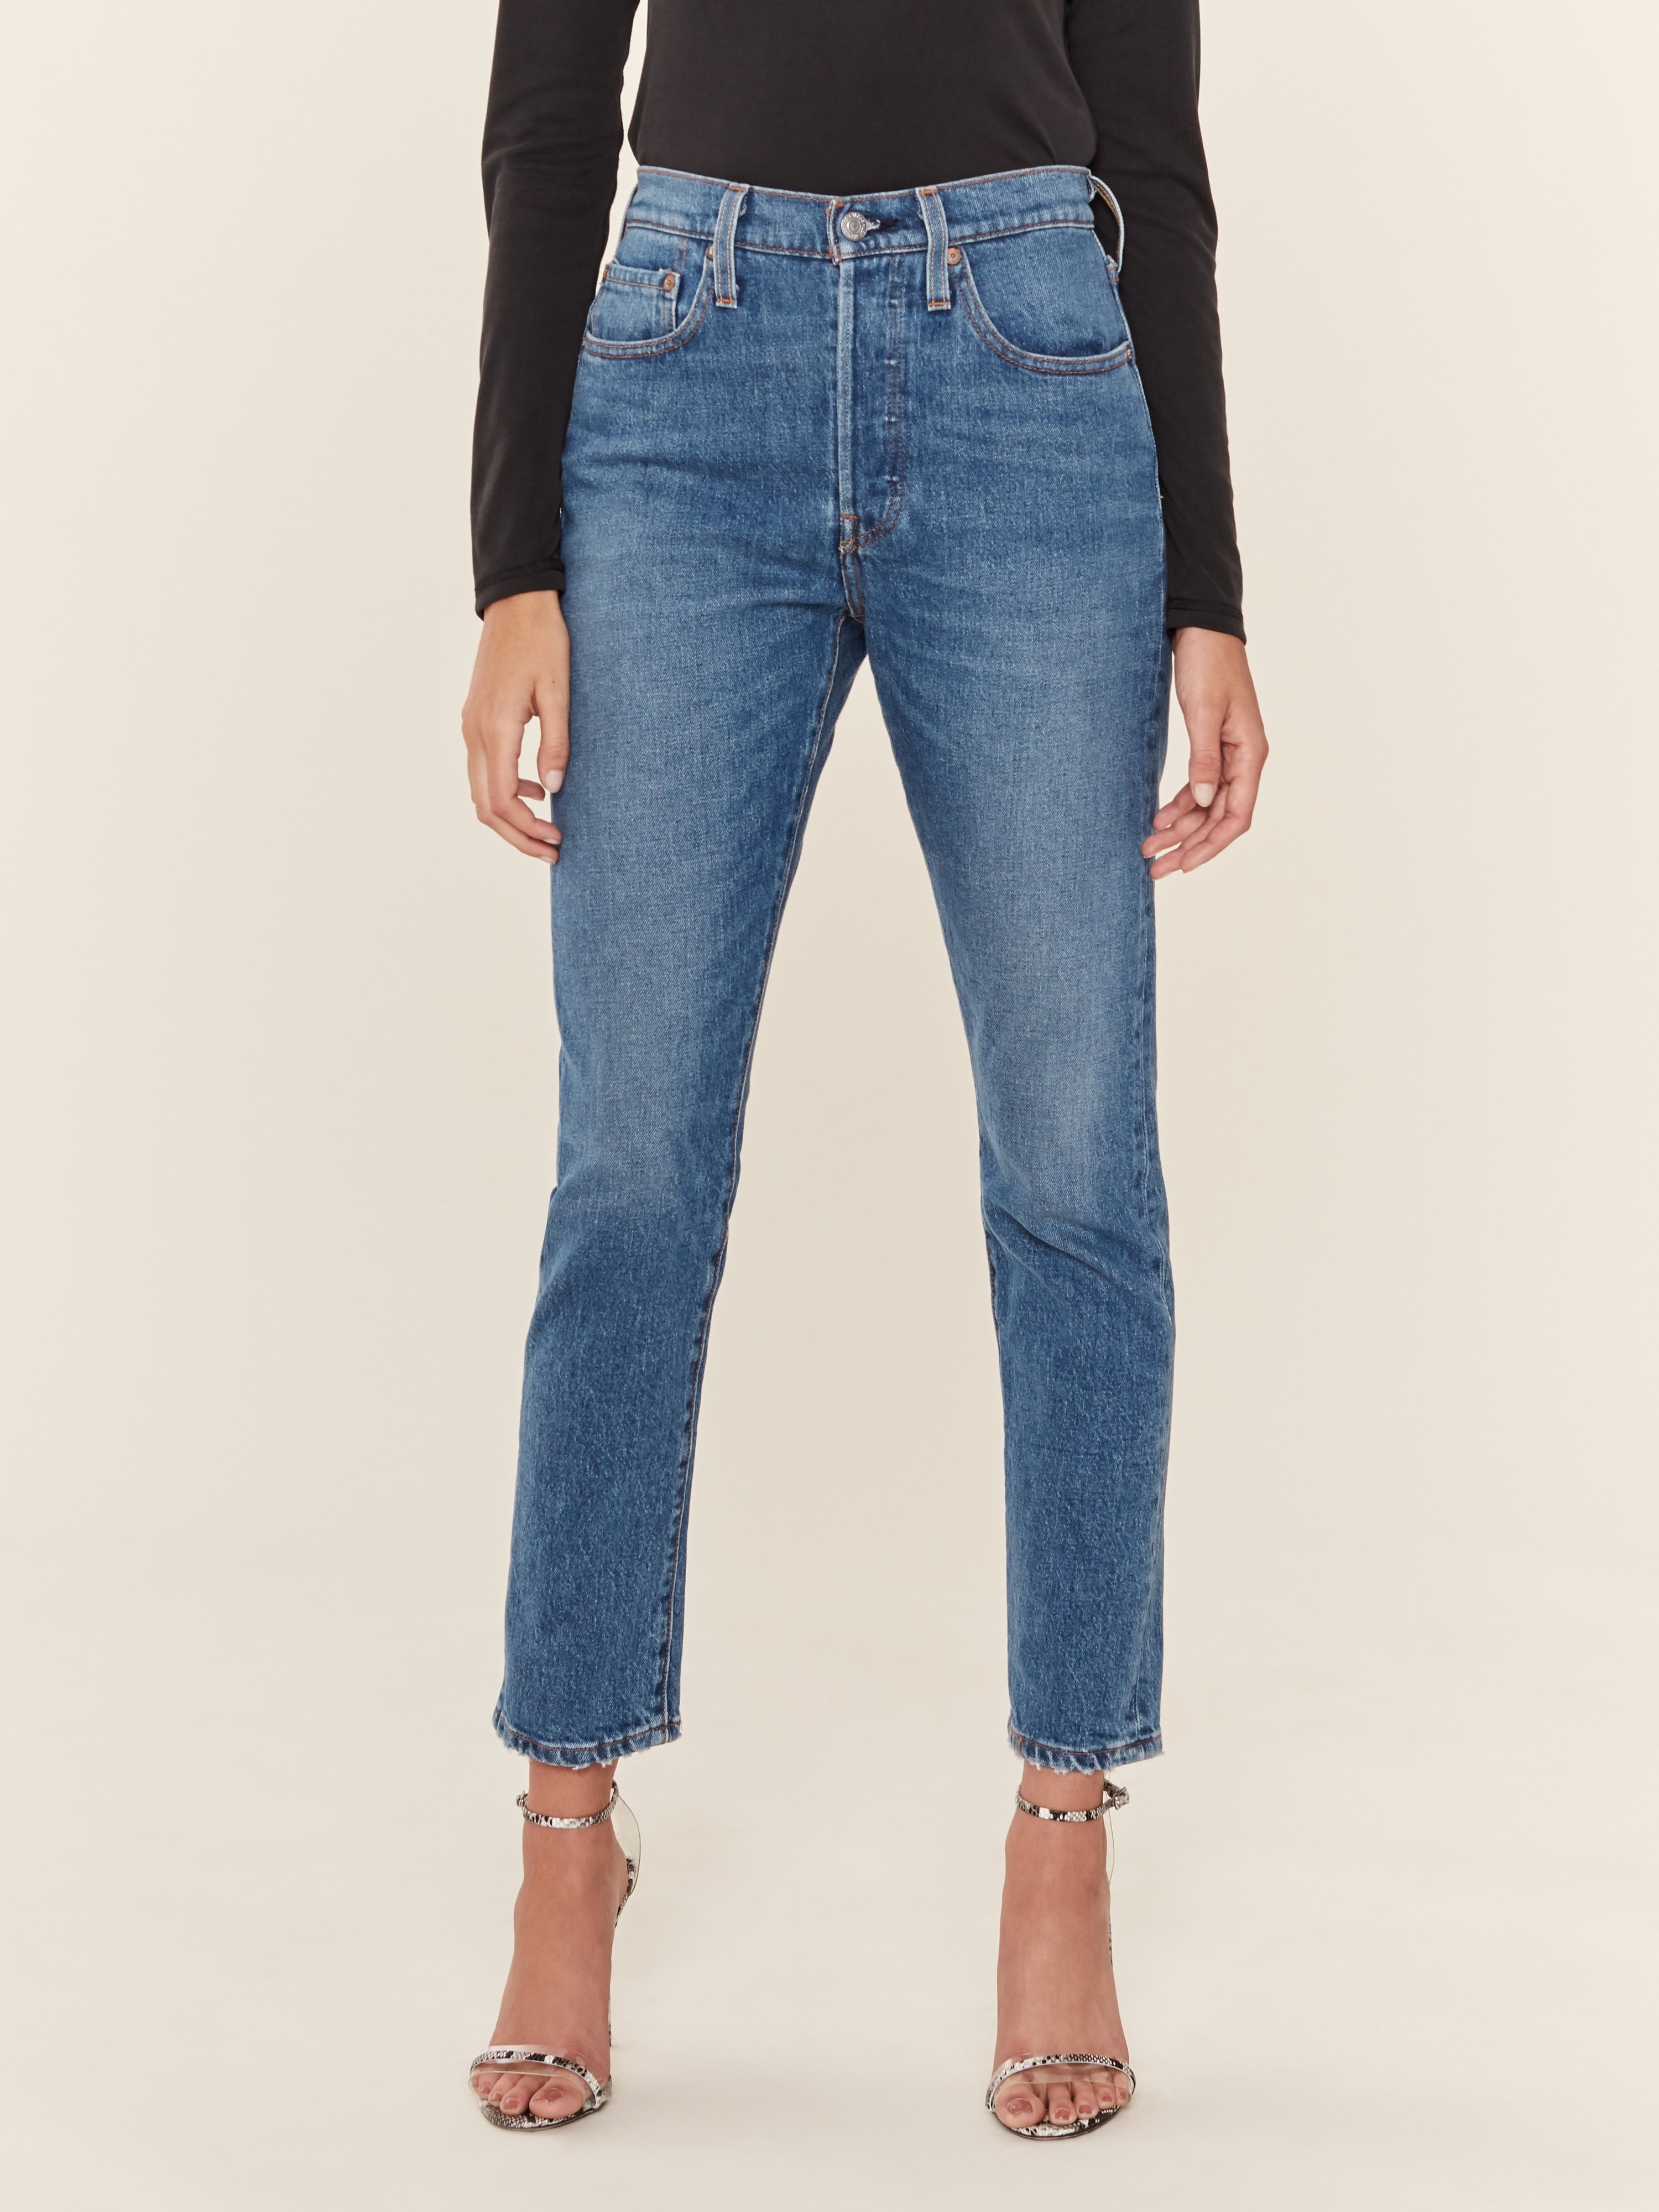 Levi's 501 Waist Nibbled Hem Skinny Jeans In These Dreams | ModeSens